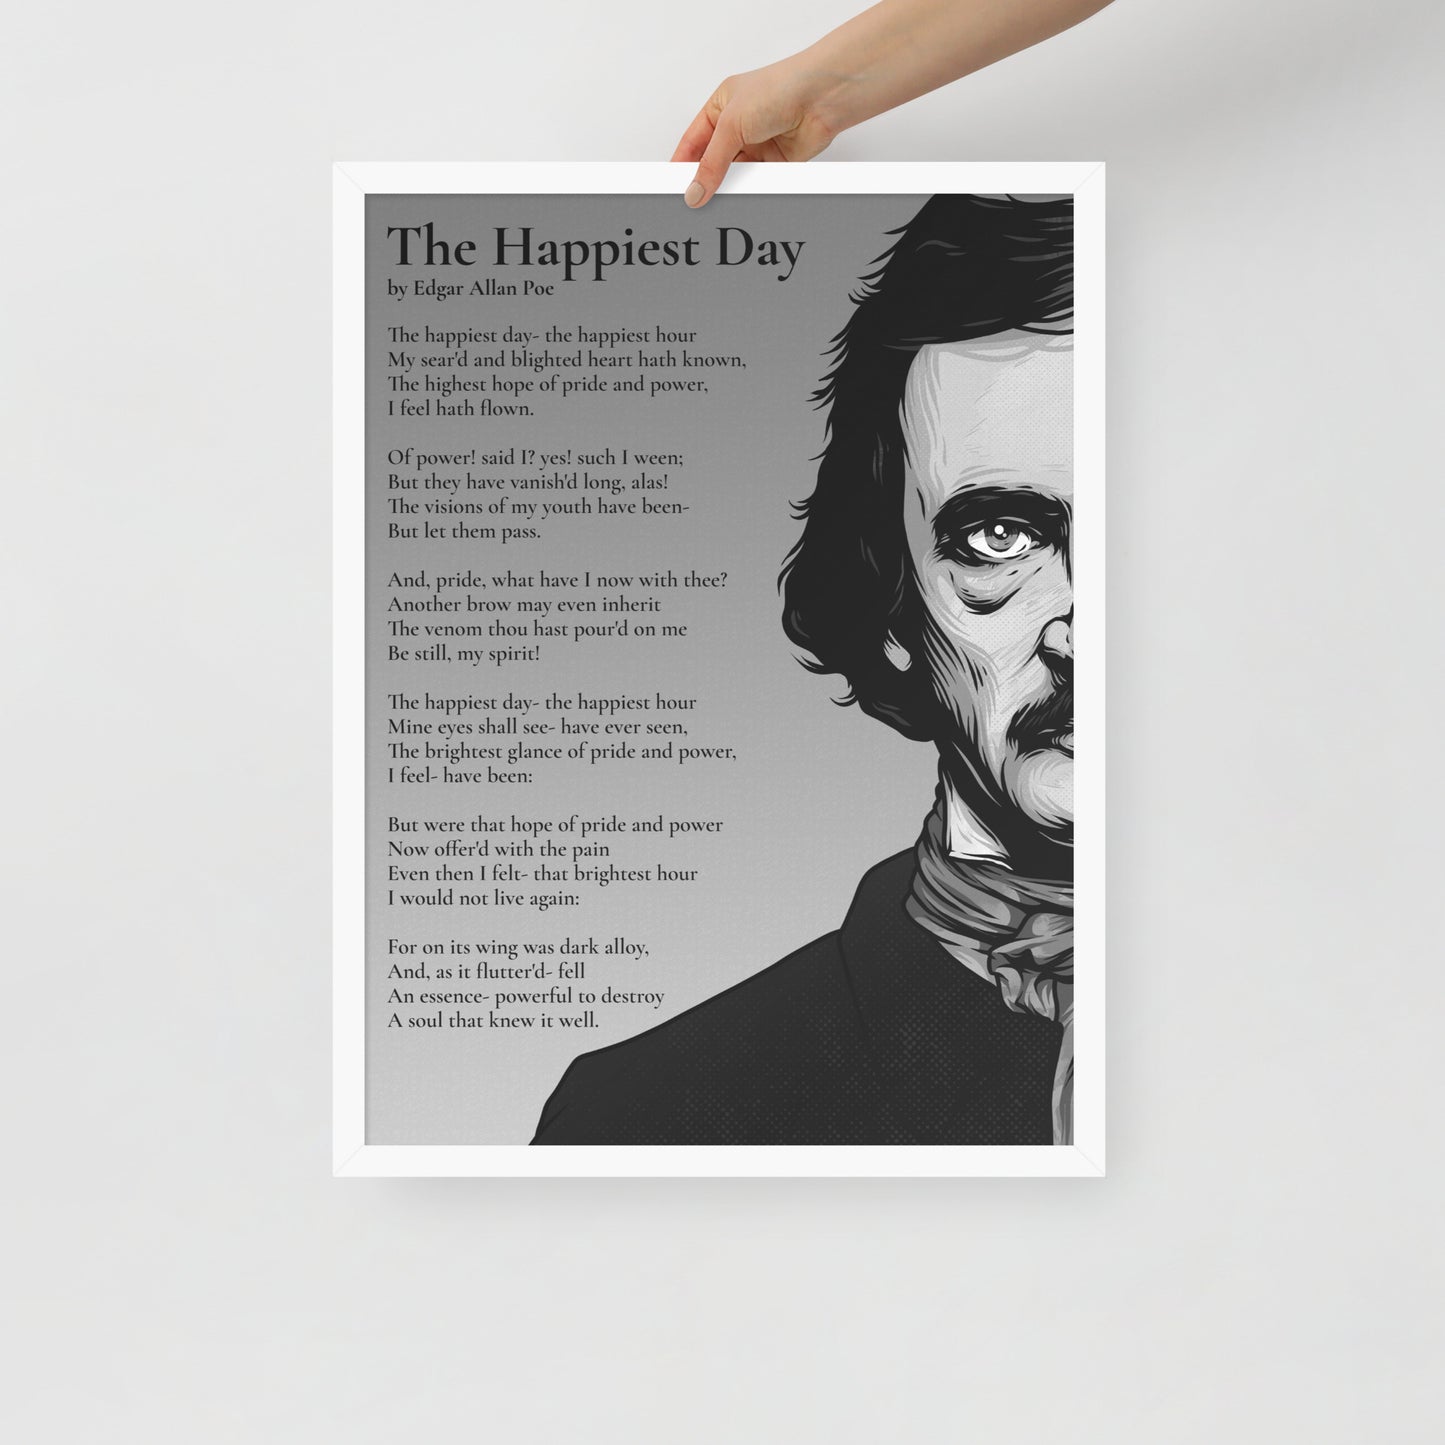 Edgar Allan Poe's 'The Happiest Day' Framed Matted Poster - 18 x 24 White Frame